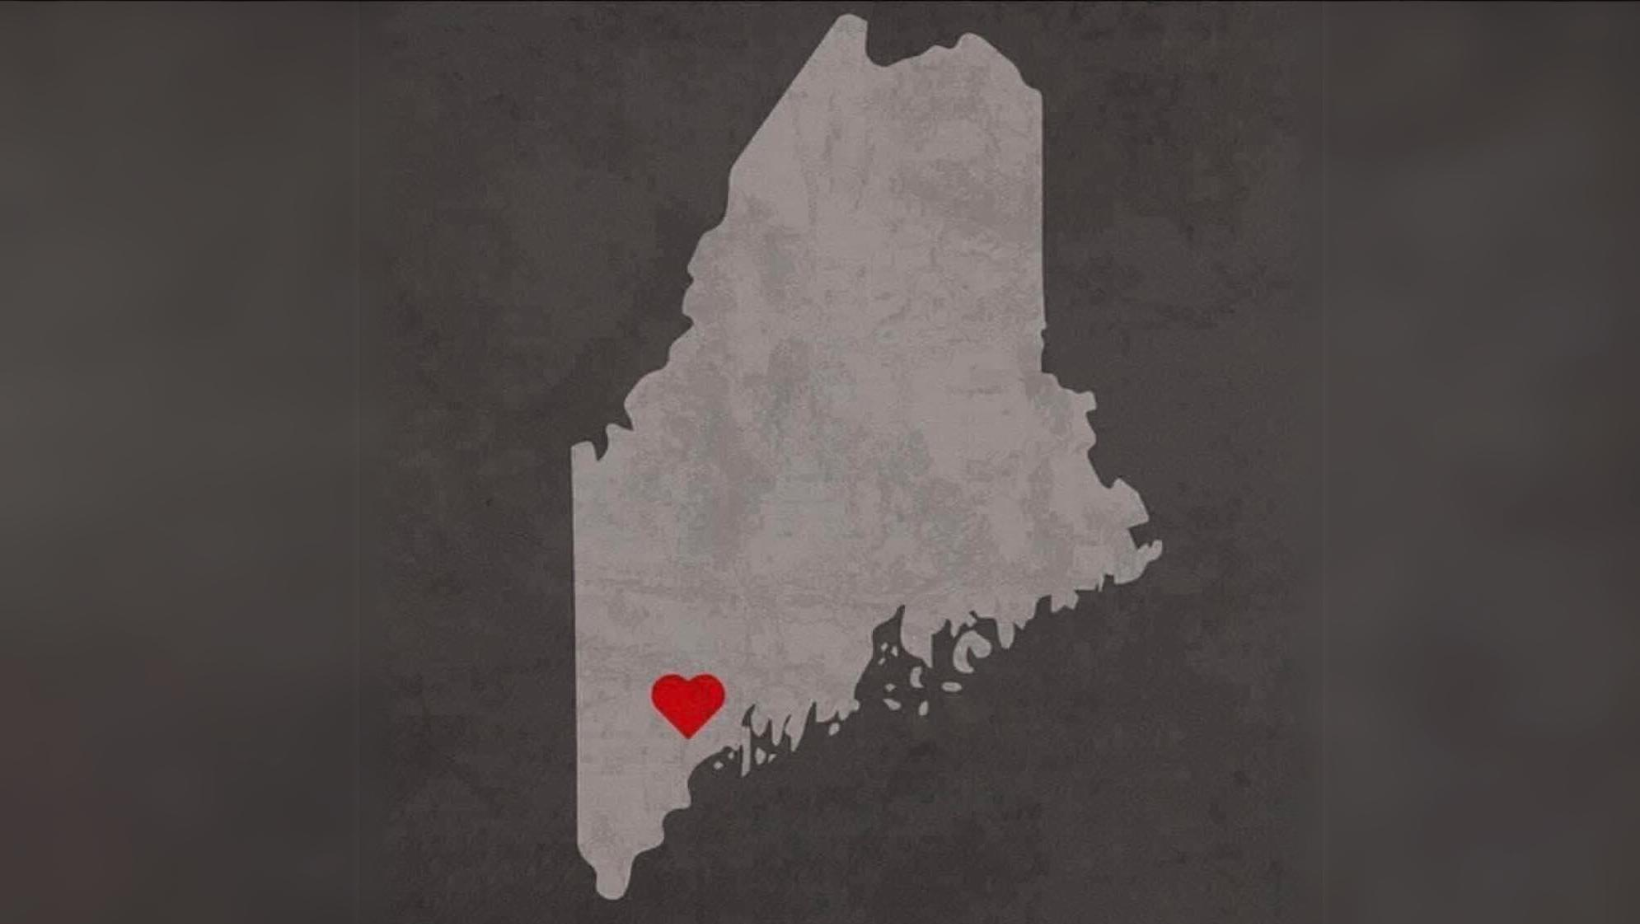 Main image for You are not alone: Resources to cope with trauma after the Lewiston mass shooting  